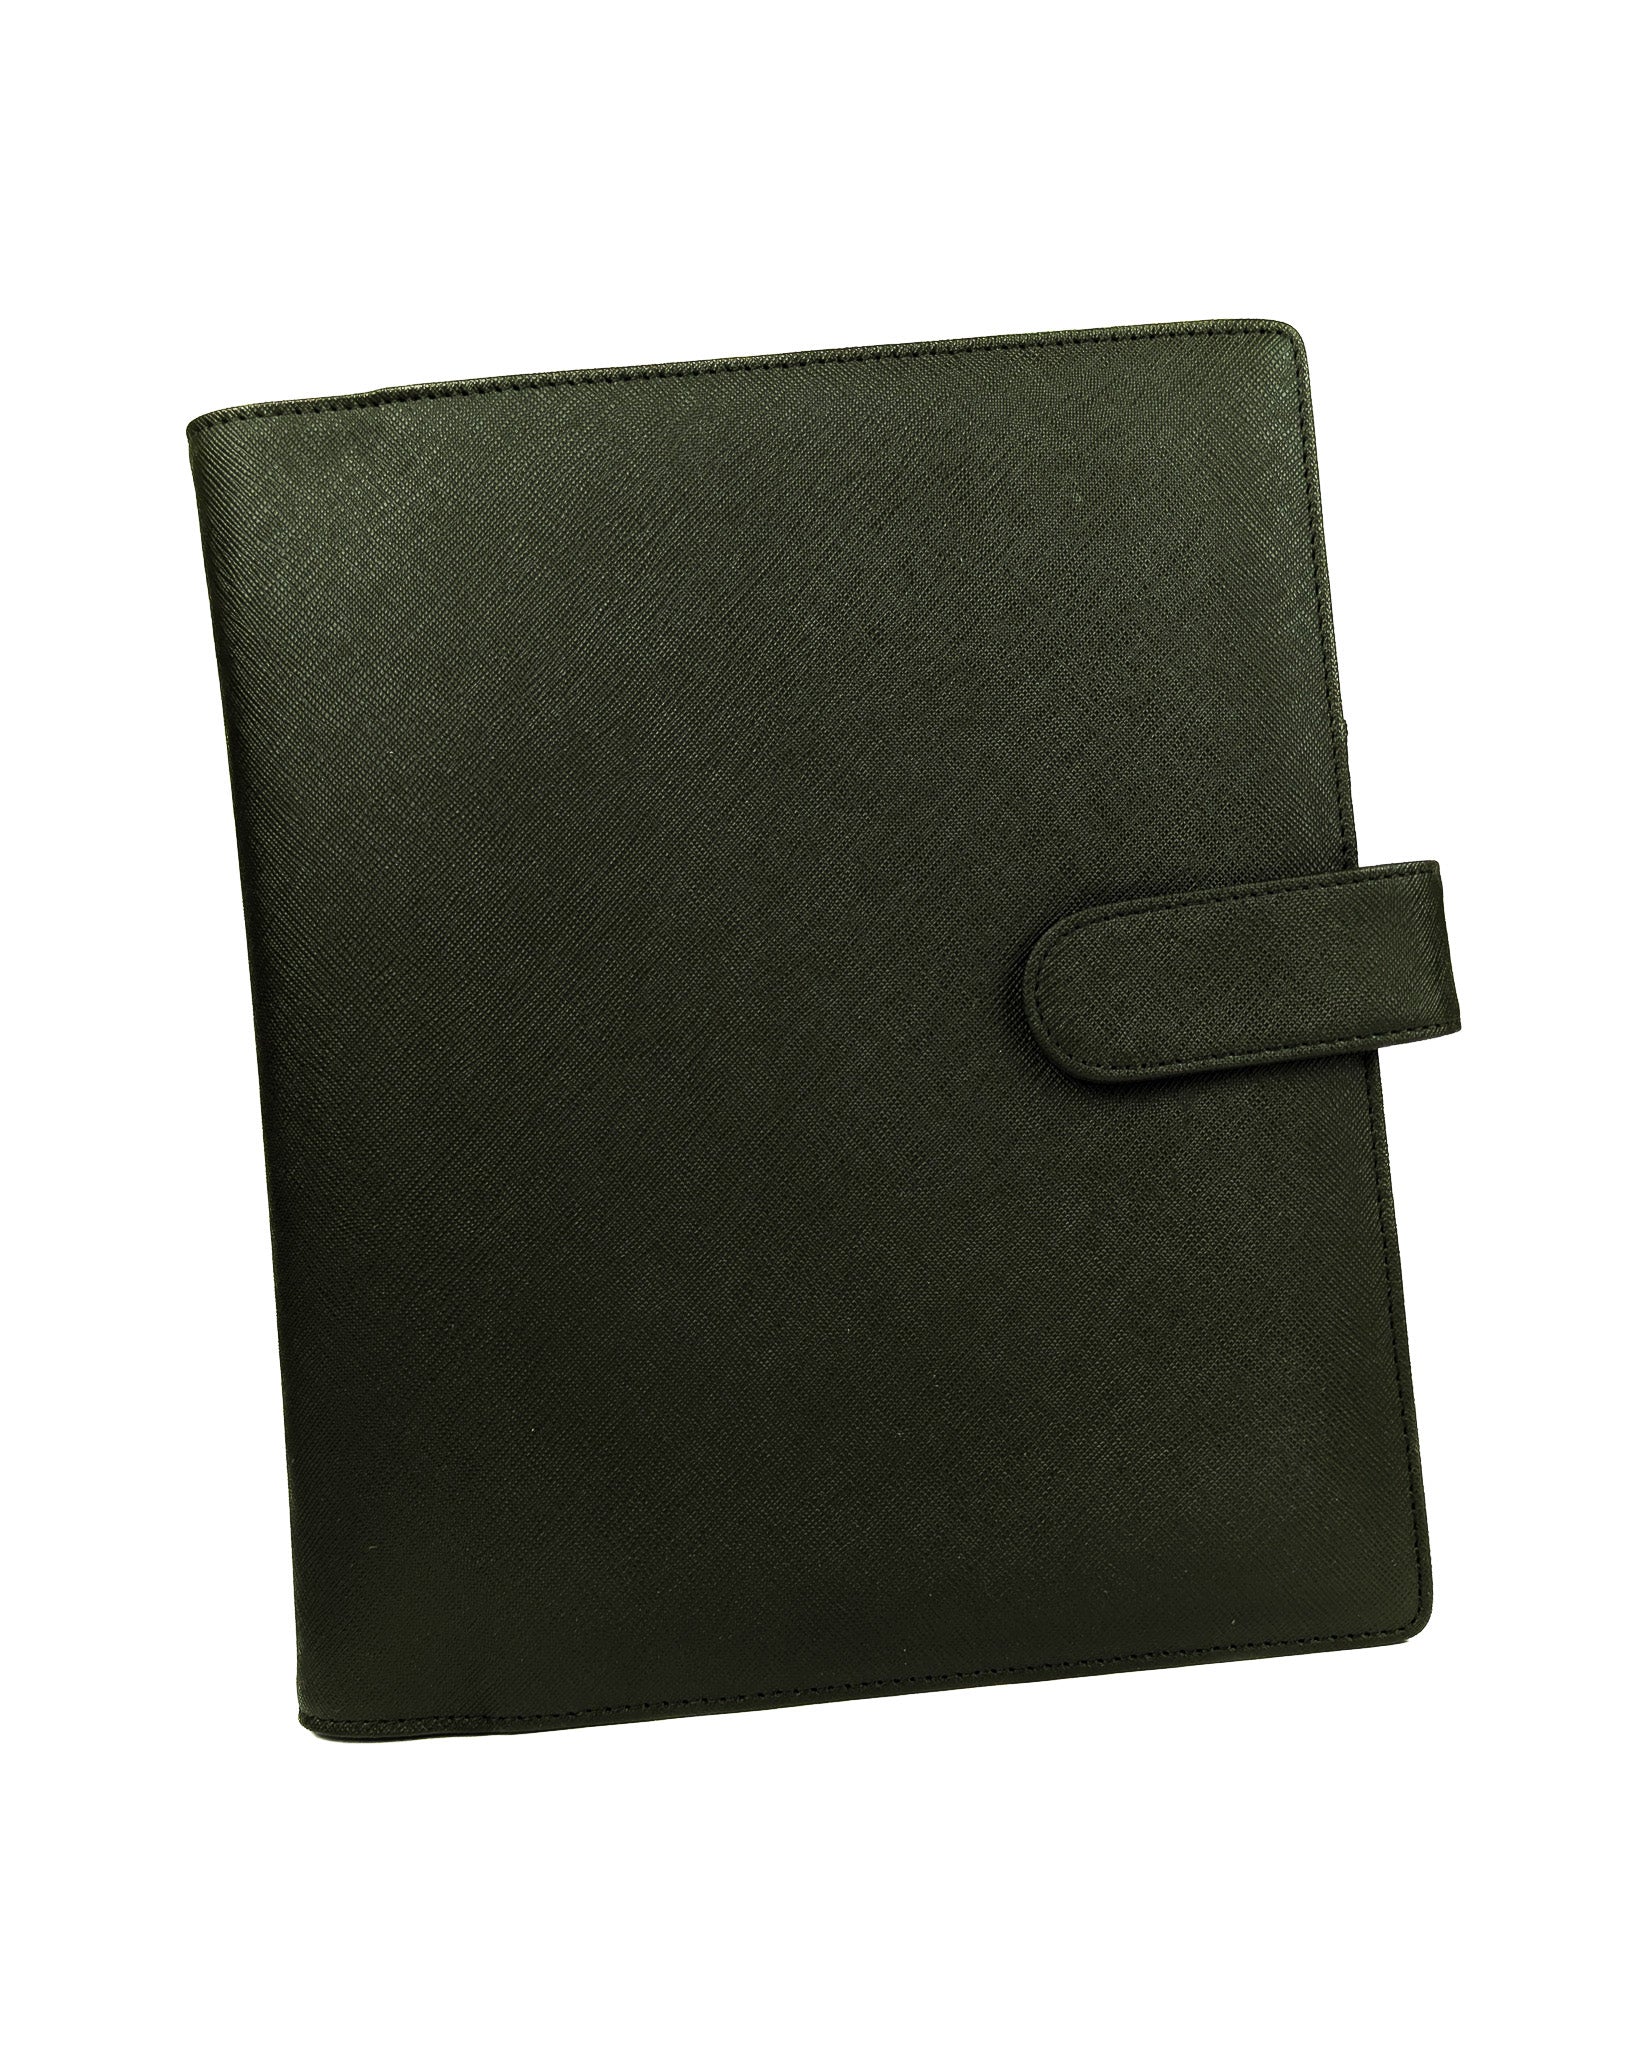 Nori green saffiano vegan leather discbound wrap cover for discbound planners and disc notebooks by Jane's Agenda.